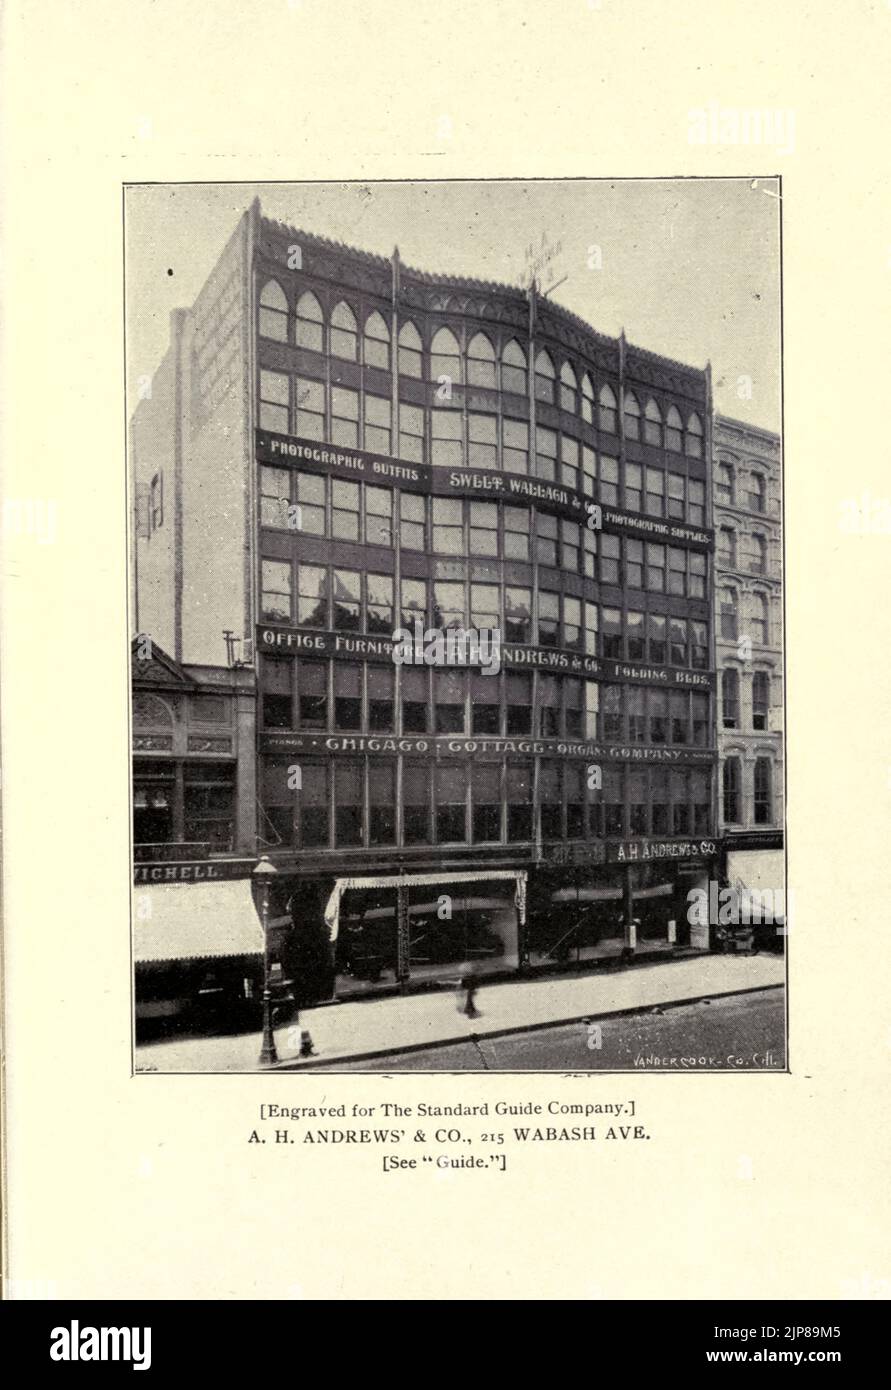 A. H. Andrews, & Co., Sales Rooms on Wabash Ave. from the book Chicago, the marvelous city of the West : a history, an encyclopedia and a guide : 1893 : illustrated by John Joseph Flinn, Publisher Chicago : Flinn & Sheppard Stock Photo